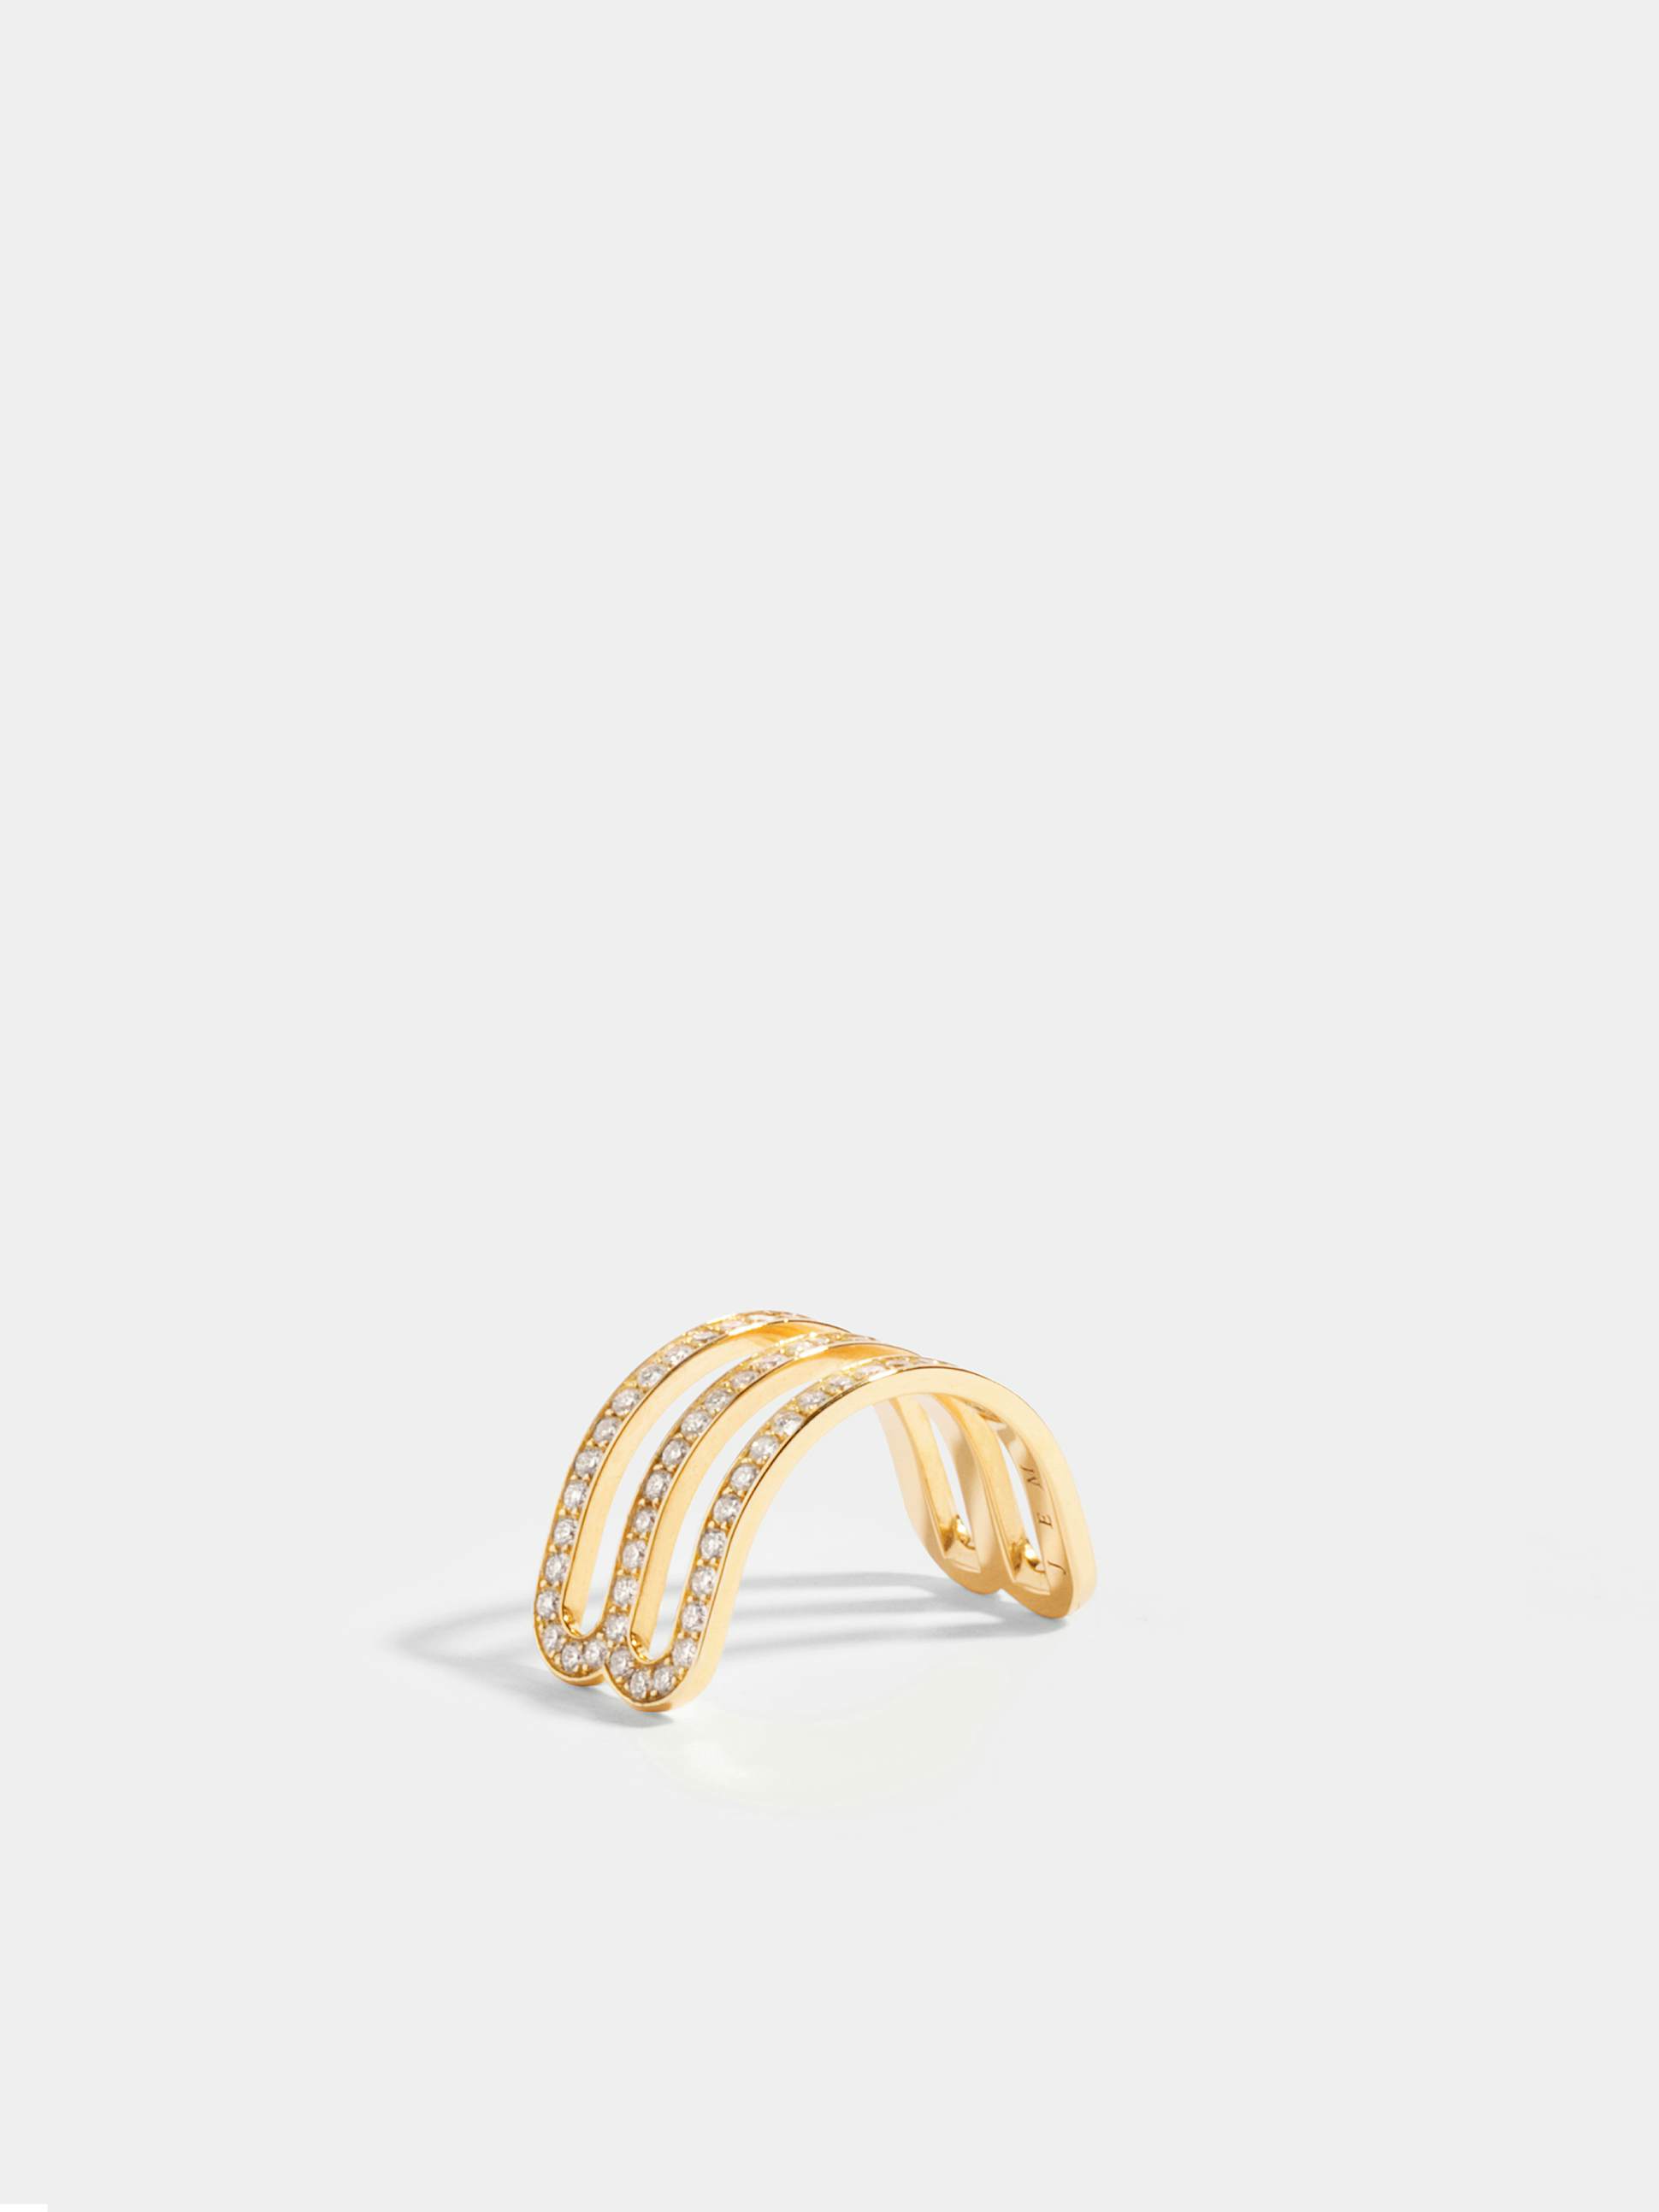 Étreintes double half-ring in 18k Fairmined ethical yellow gold, paved with lab-grown diamonds.